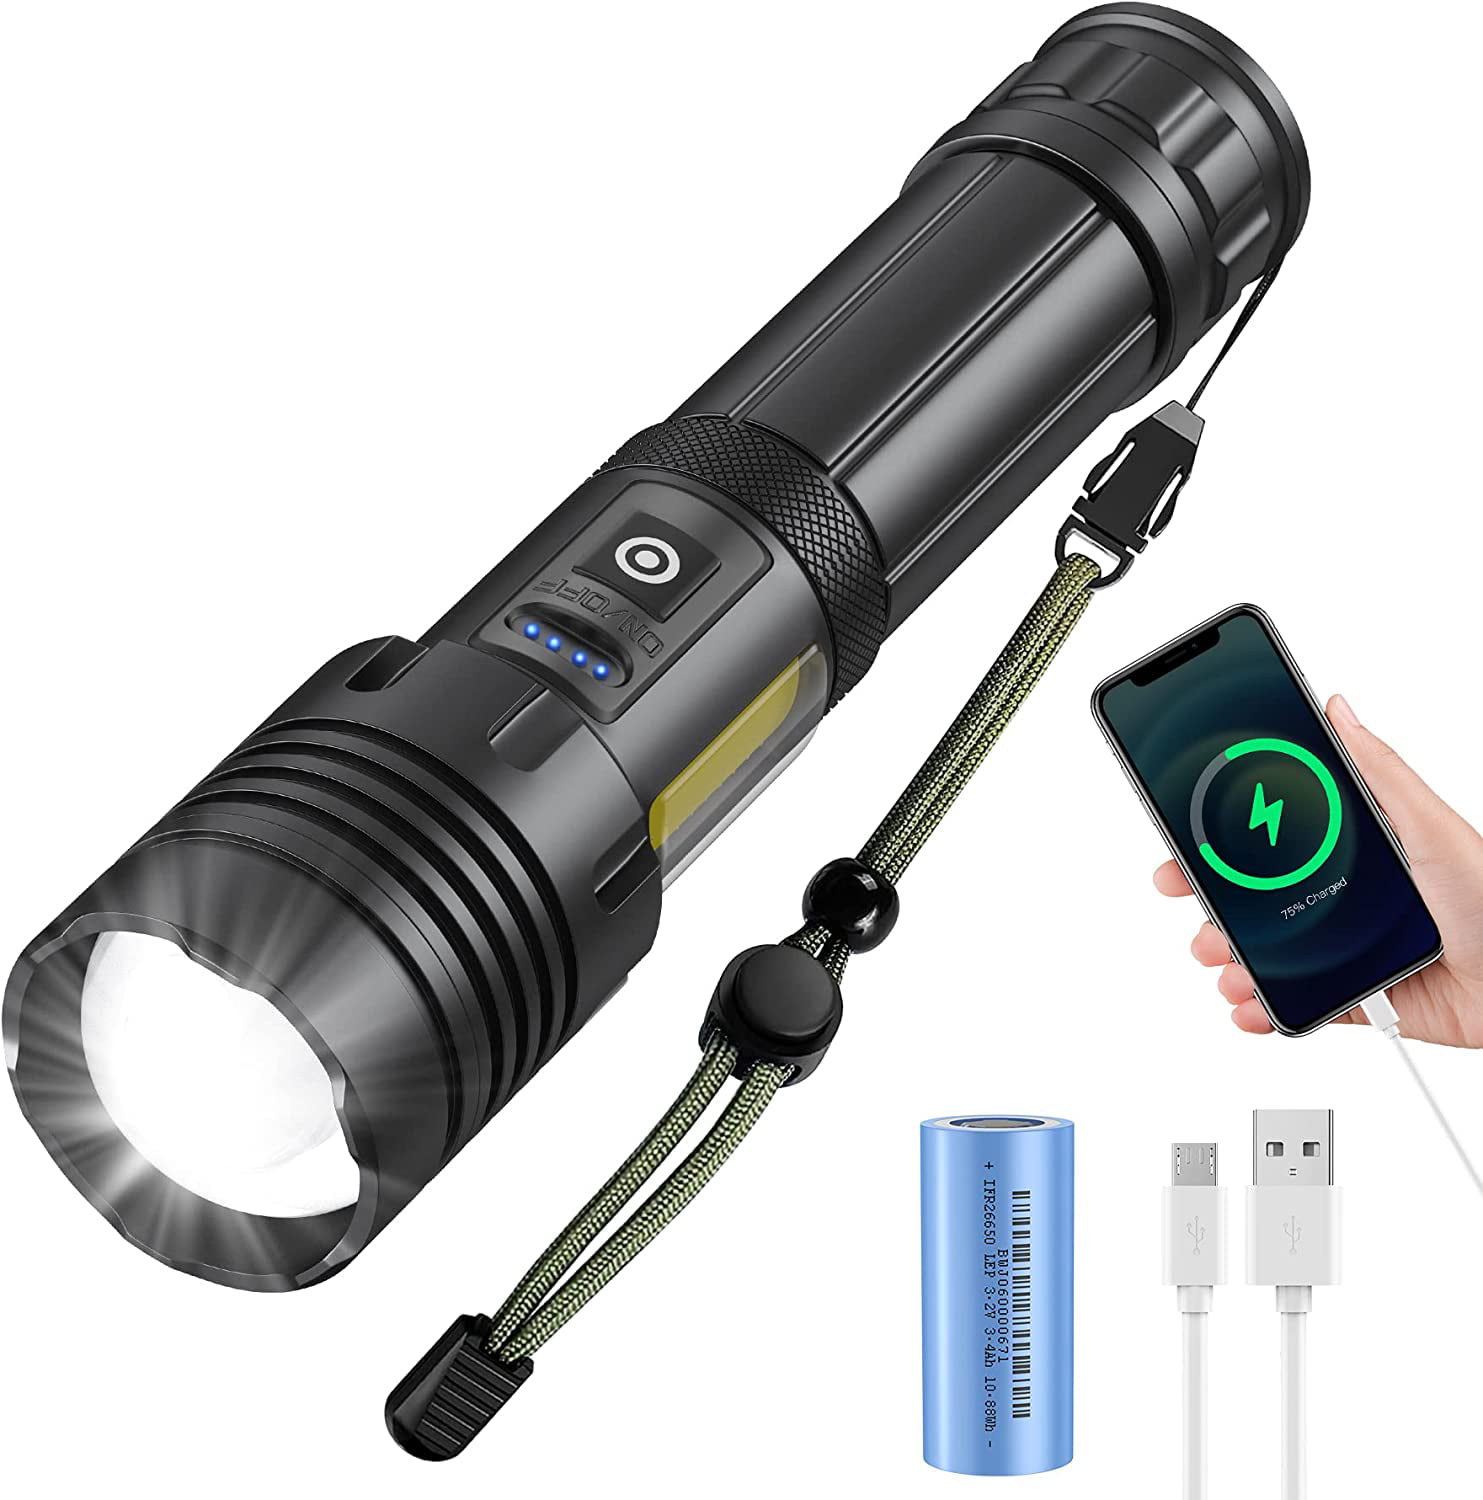 Powerful Rechargeable LED Torch, 3000 Lumens, Flashlight with 3400 Battery (Included), Waterproof Zoomable Tactical for Camping, Running, Hiking, Emergency - Walmart.com